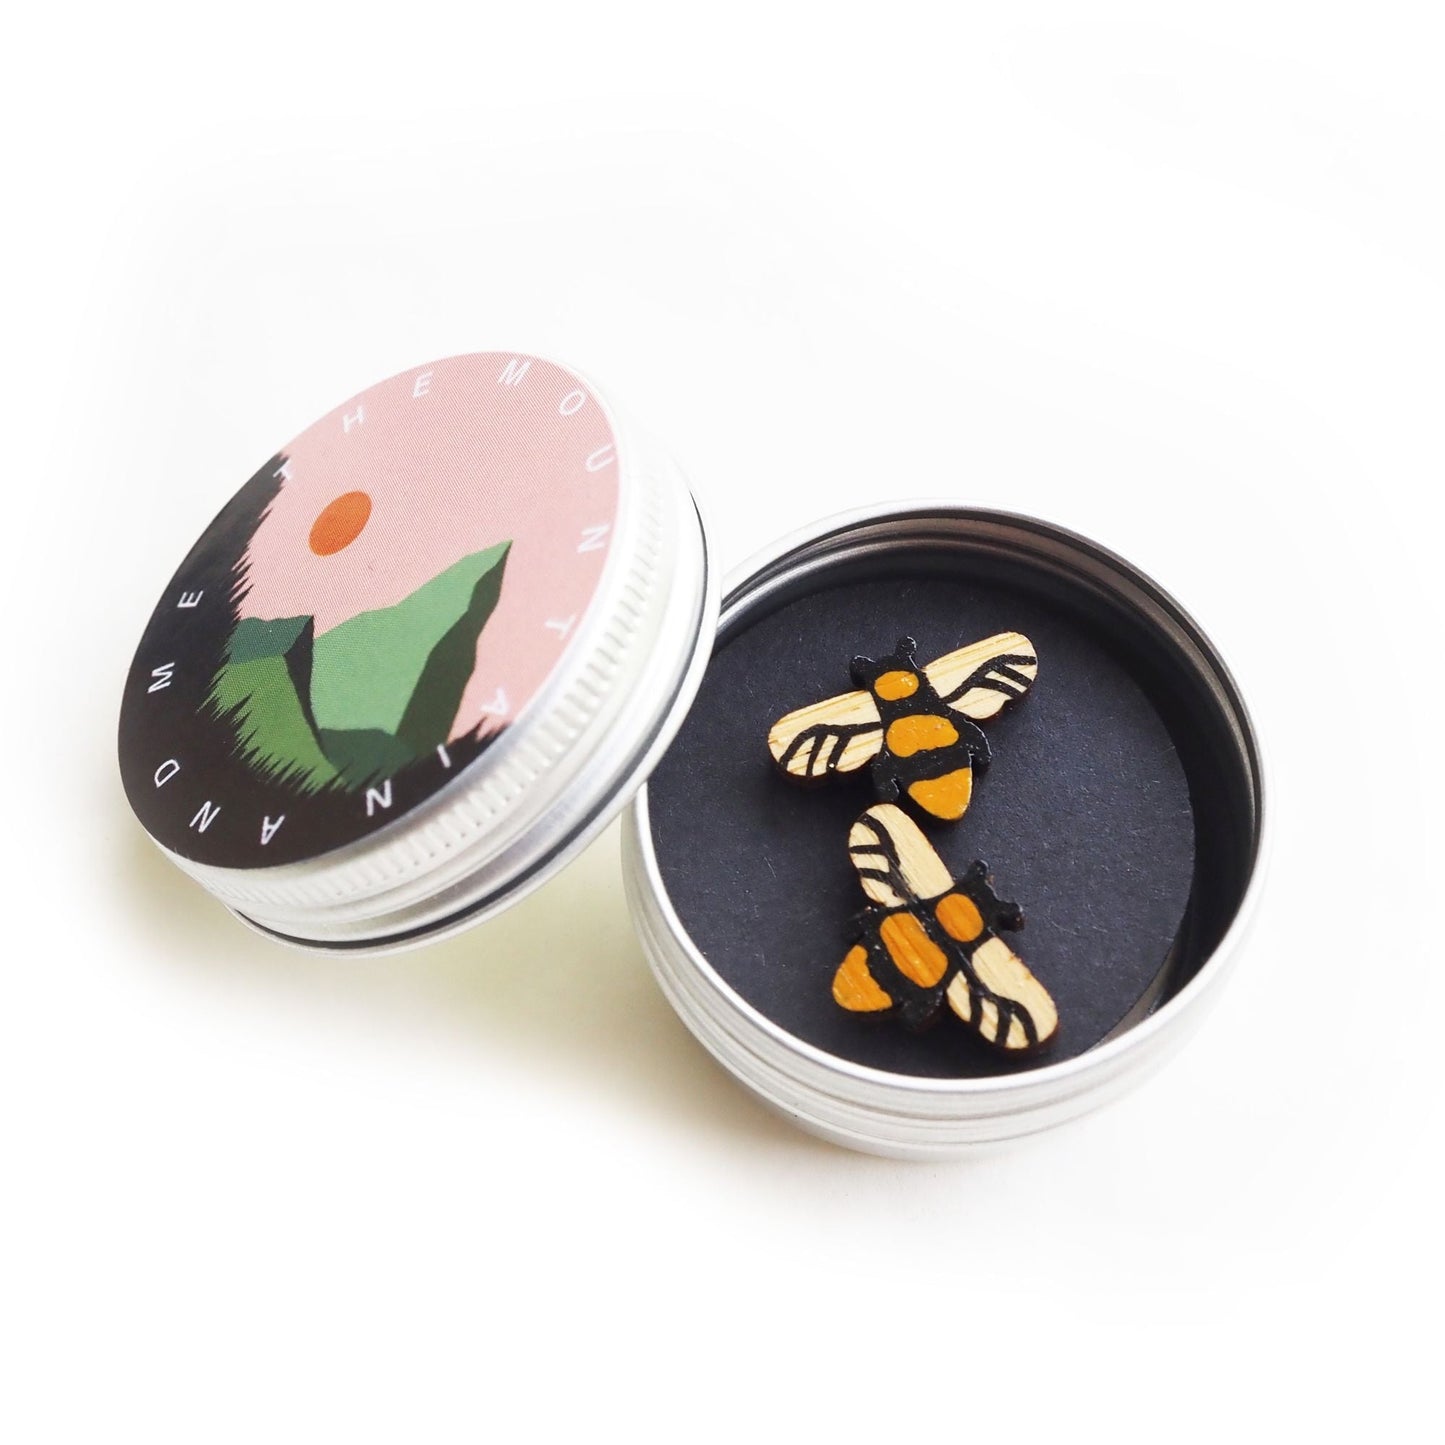 The Manchester bee earrings inside the screw top tin. The lid is resting against the side of the open tin and has the mountain and me branding on it.